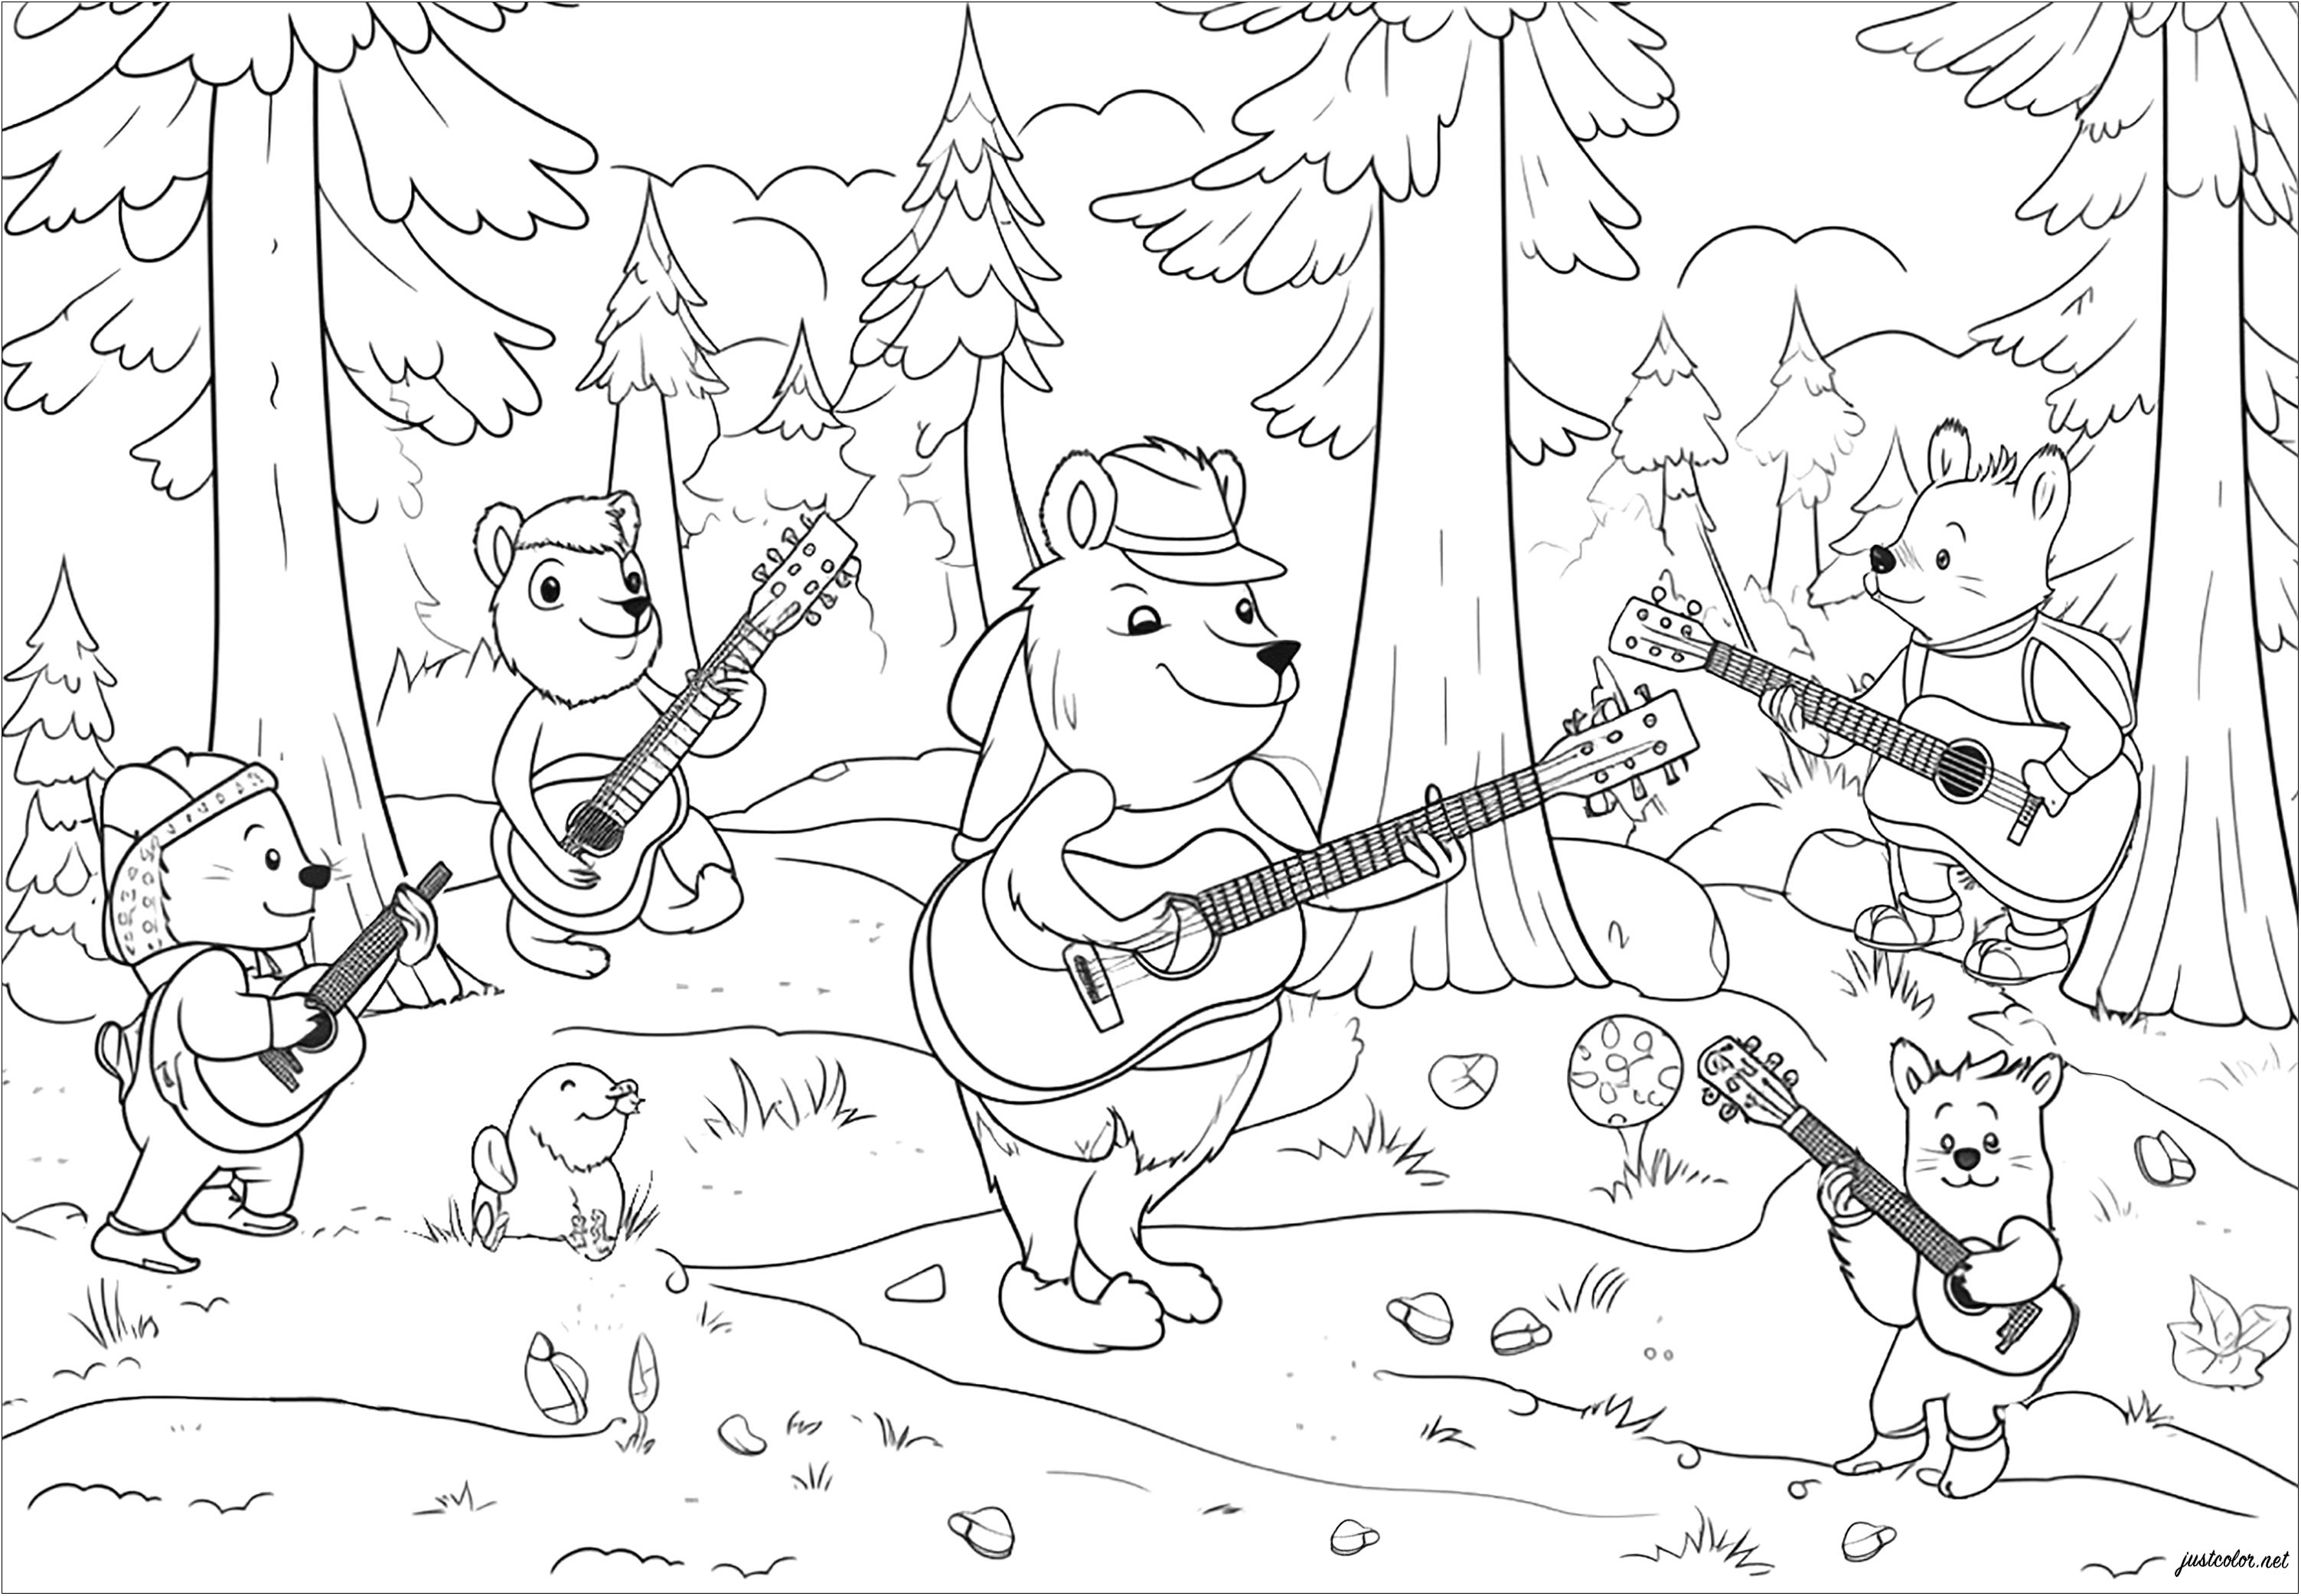 This coloring page is childlike but full of detail, with bears singing in a lovely forest. This coloring page is a real invitation to imagination and creativity. It also encourages us to open up to nature and respect its flora and fauna.